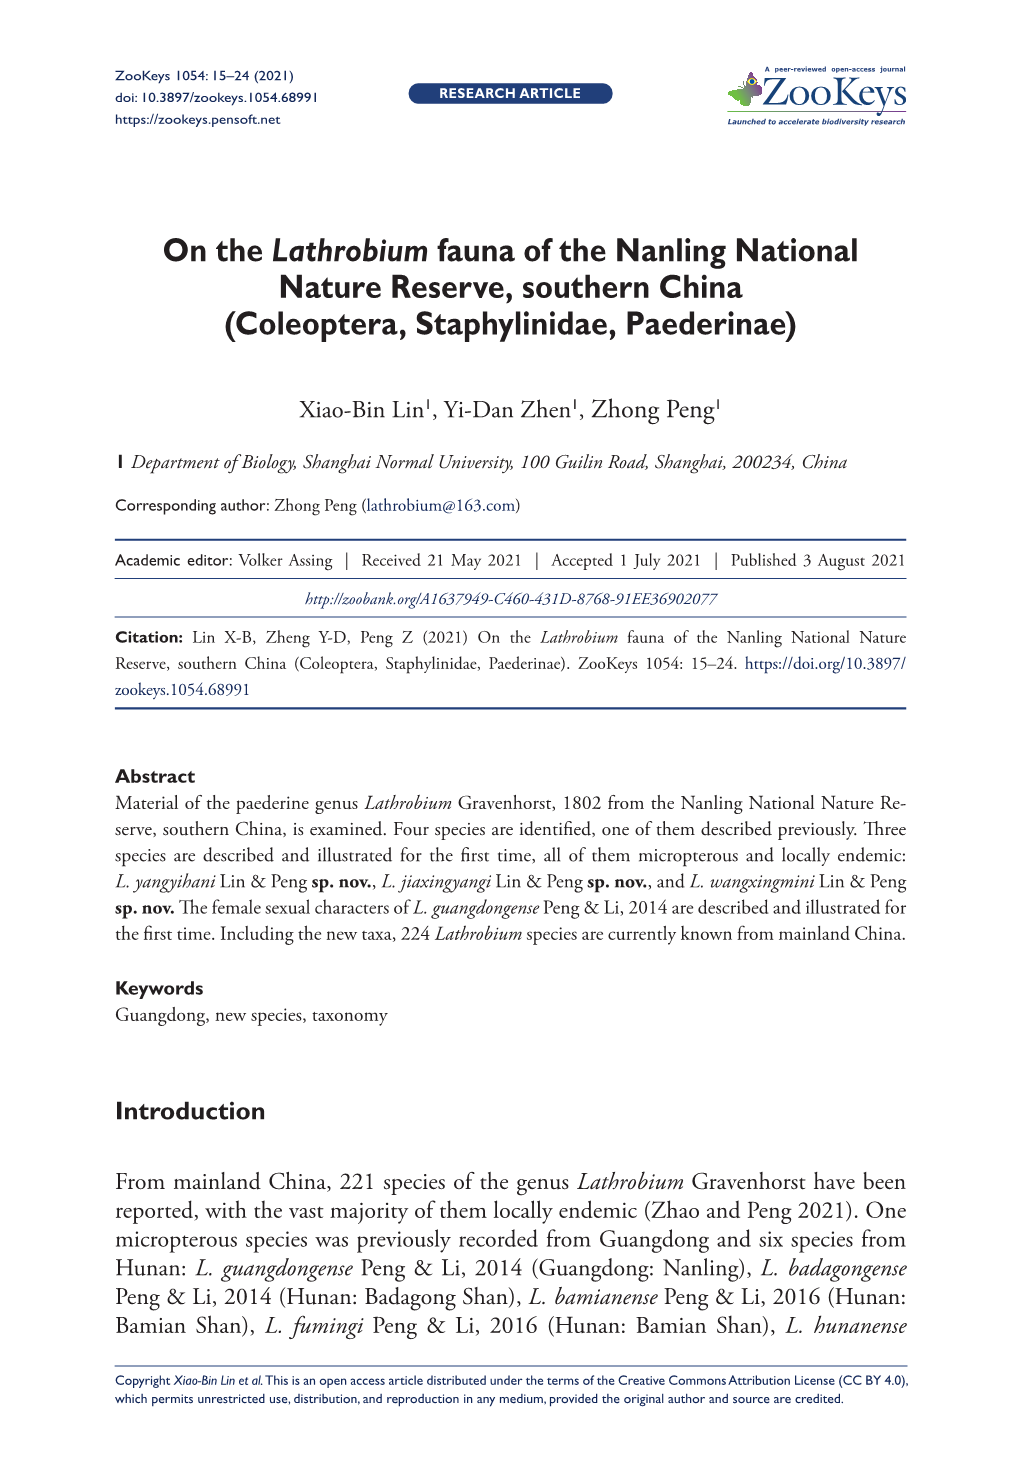 On the Lathrobium Fauna of the Nanling National Nature Reserve, Southern China (Coleoptera, Staphylinidae, Paederinae)